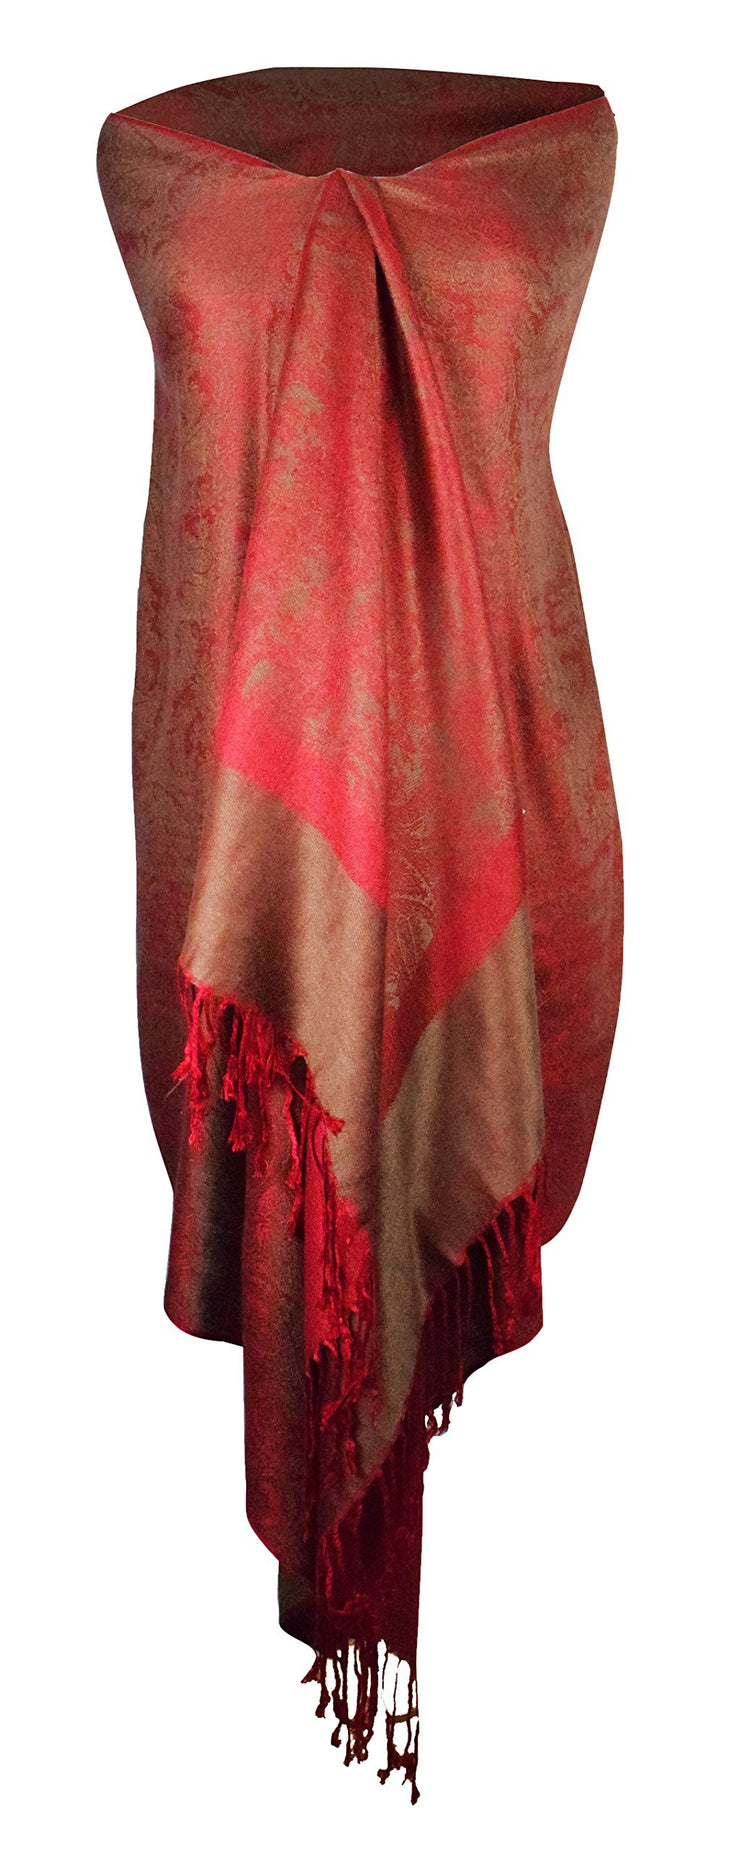 Red and Chocolate Brown Peach Couture Elegant Vintage Two Color Jacquard Paisley Pashmina Shawl Wrap